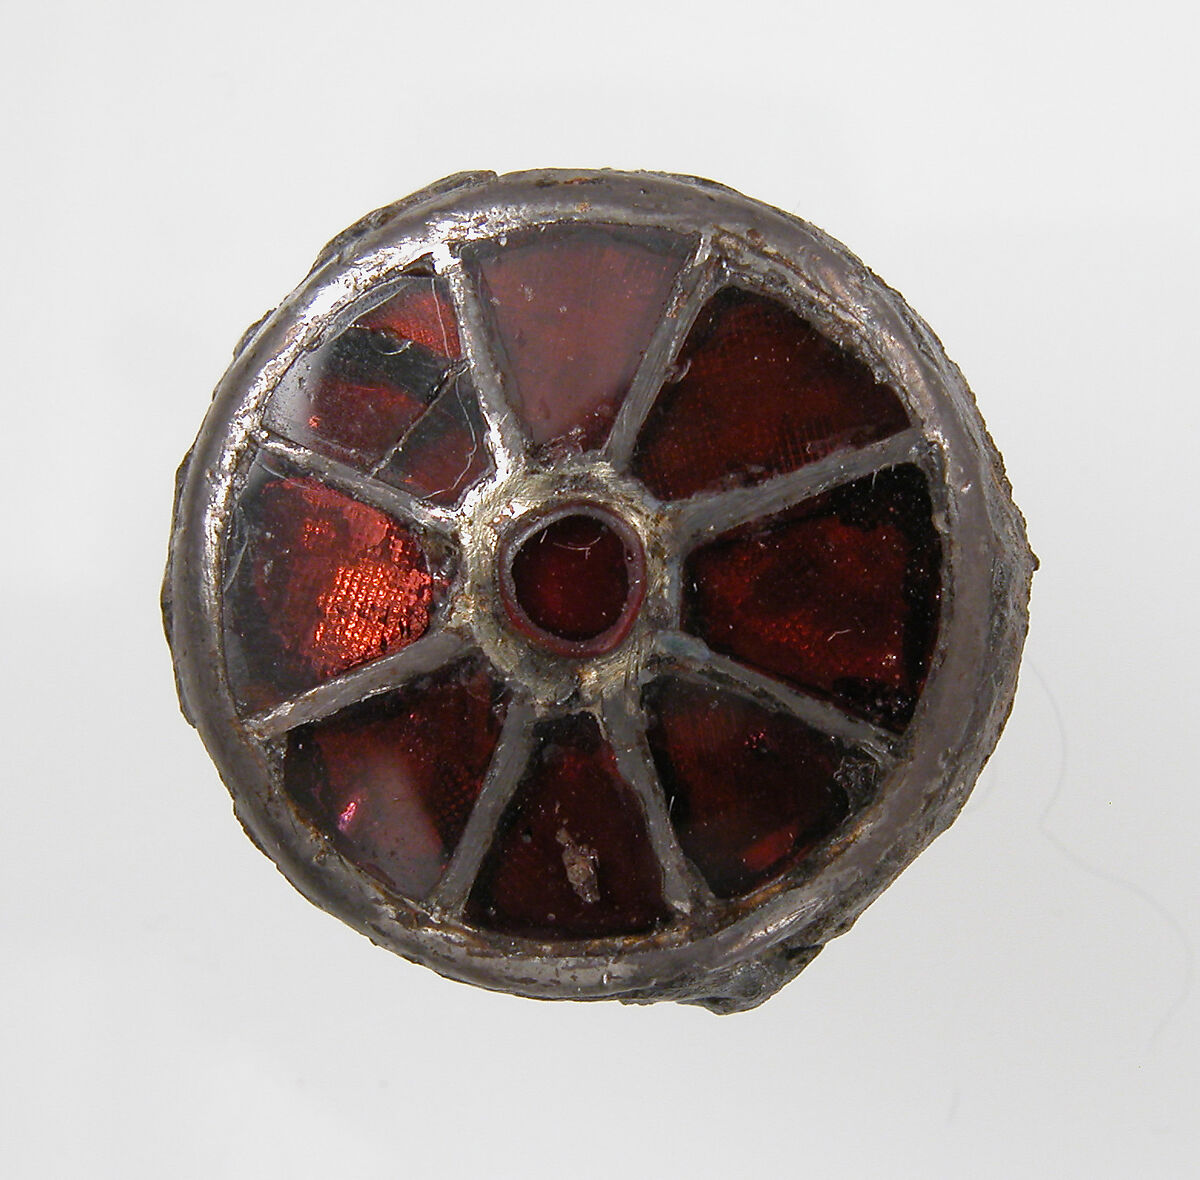 Disk Brooch, Silver over iron core, garnet or glass paste, gold foil, Frankish 